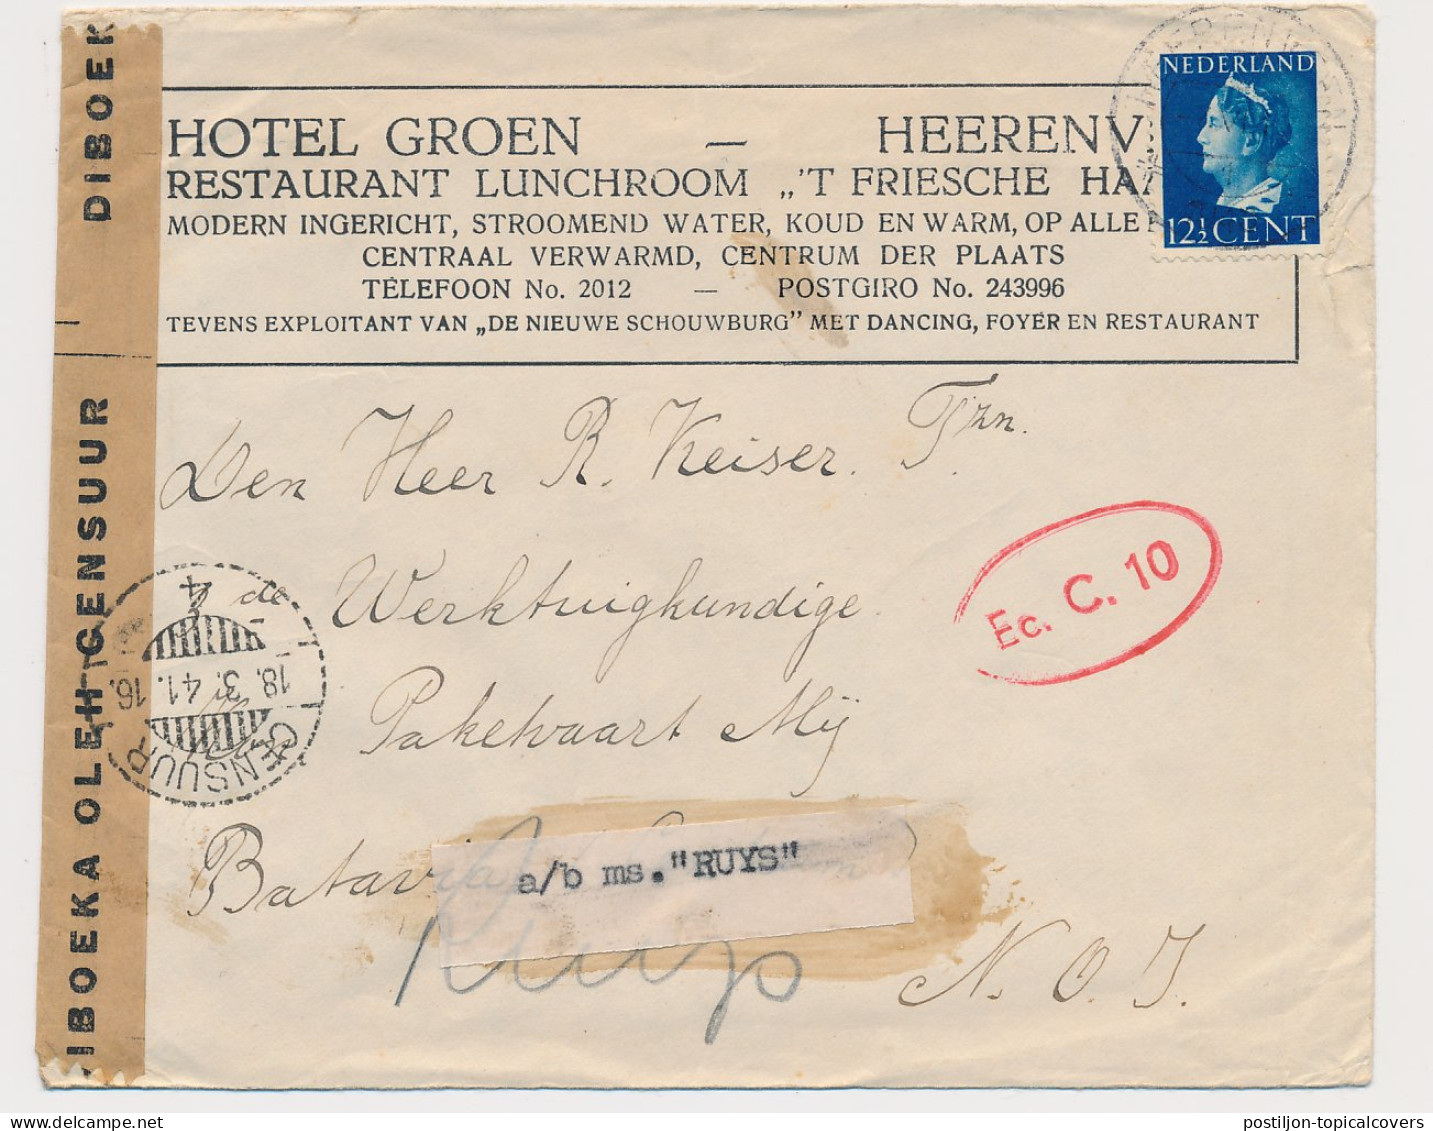 Ill. Censored Cover Neth. Indies 1940 Forwarded / Label Ms. RUYS - Netherlands Indies